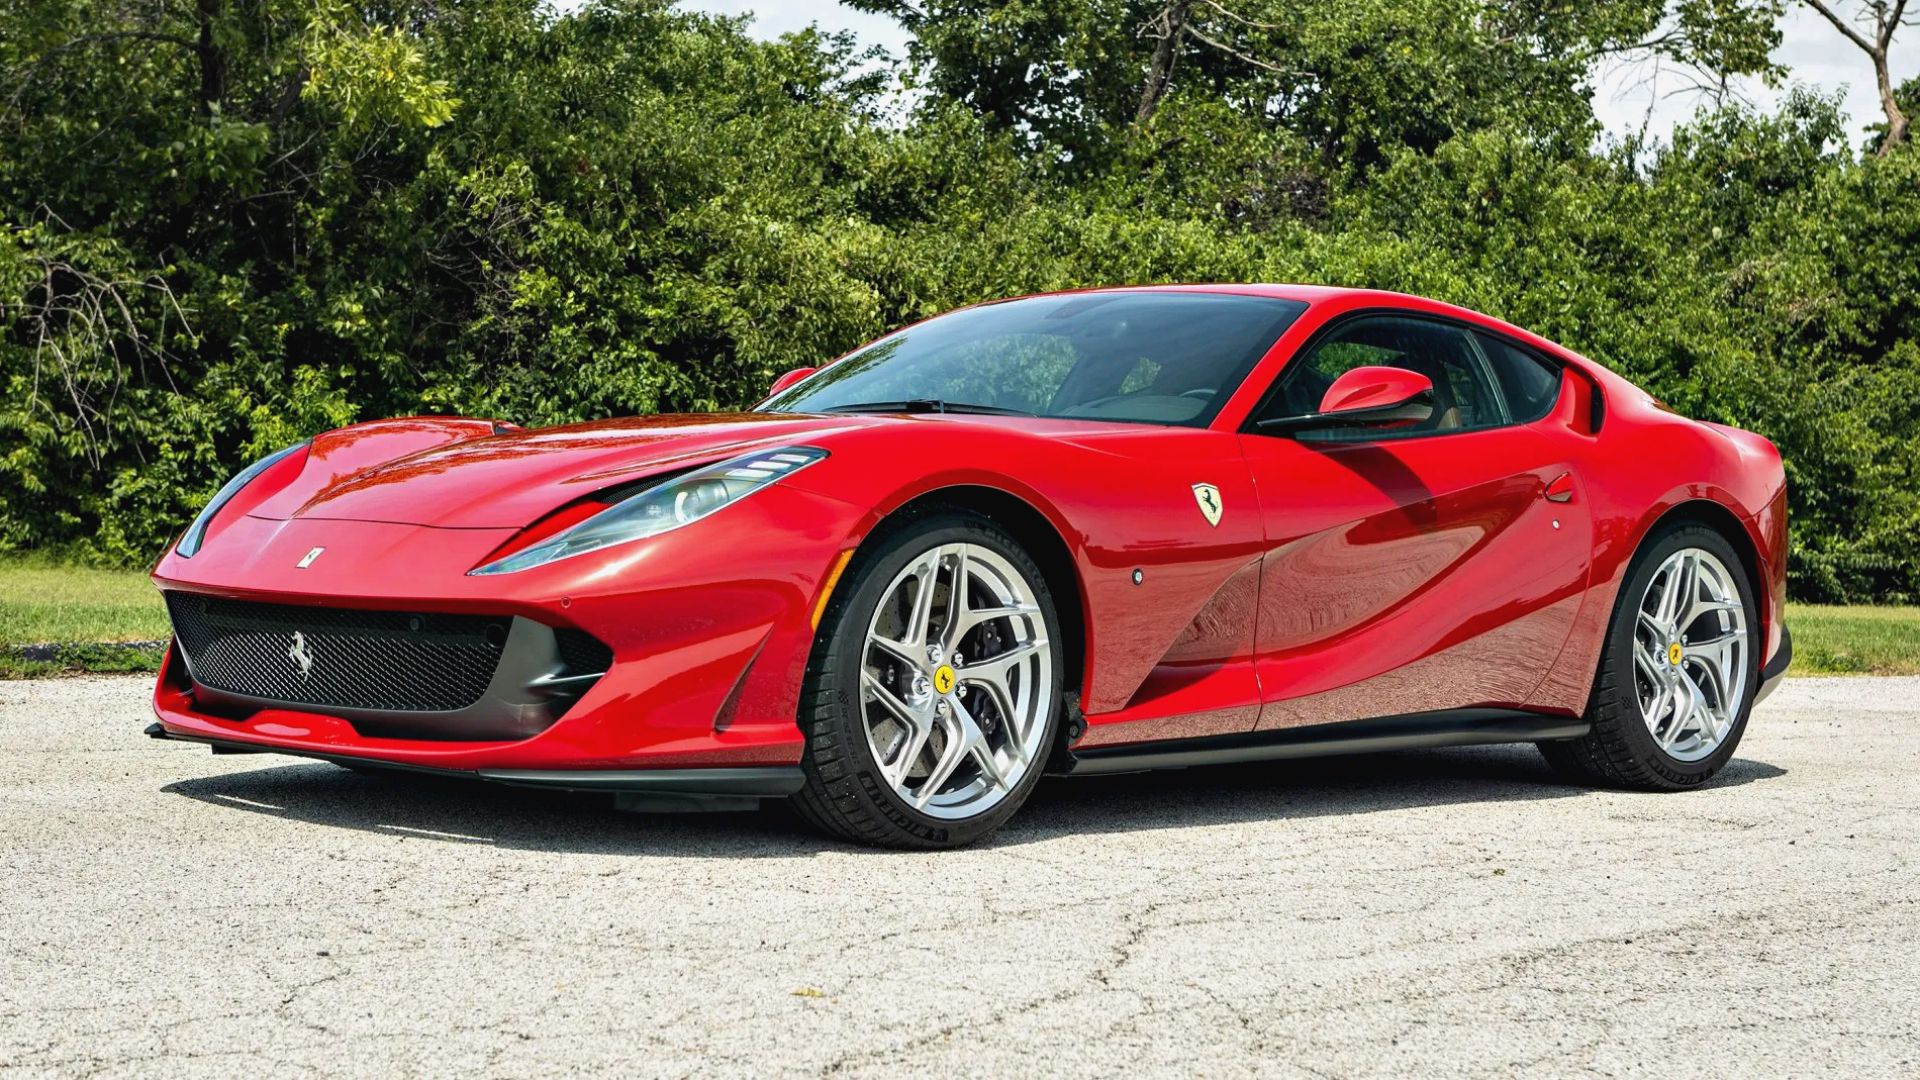 first look: ferrari unleashes the 830-horsepower 12cilindri coupe and spider from the stable